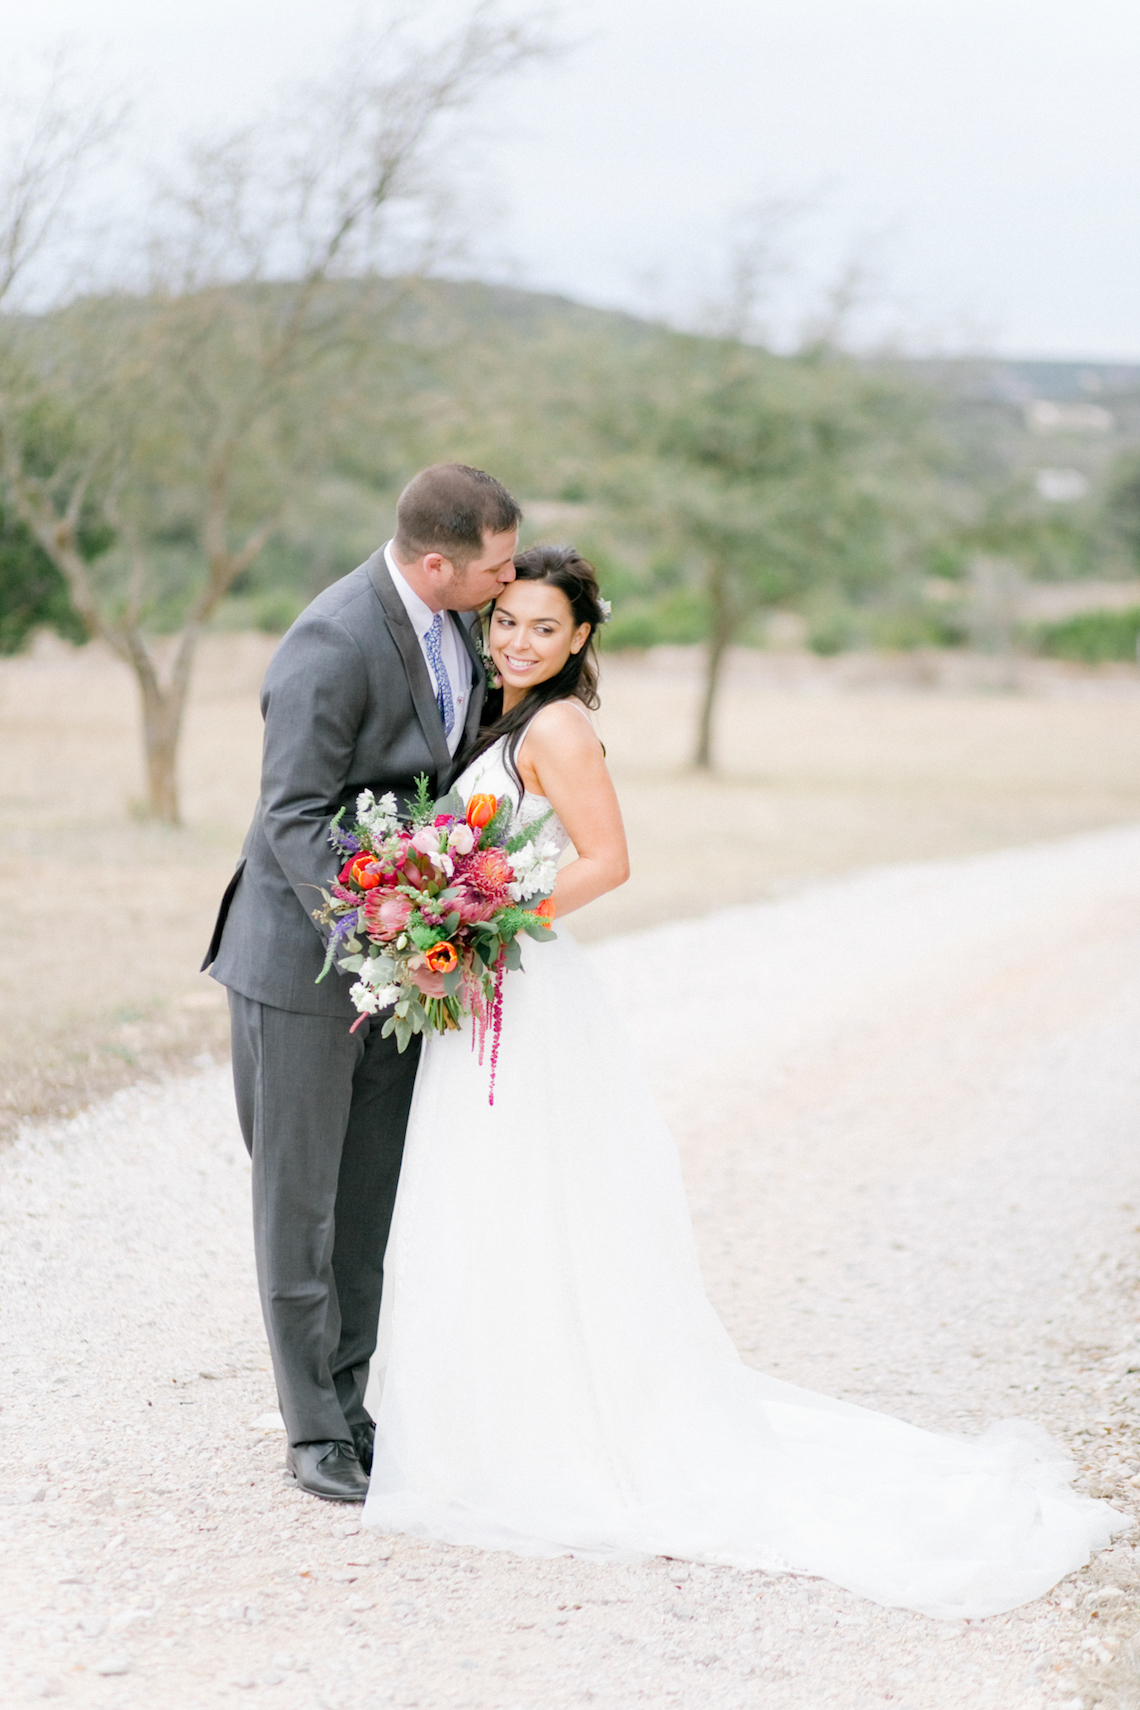 Summer Berry Wedding Ideas From The Hill Country | Jessica Chole 44